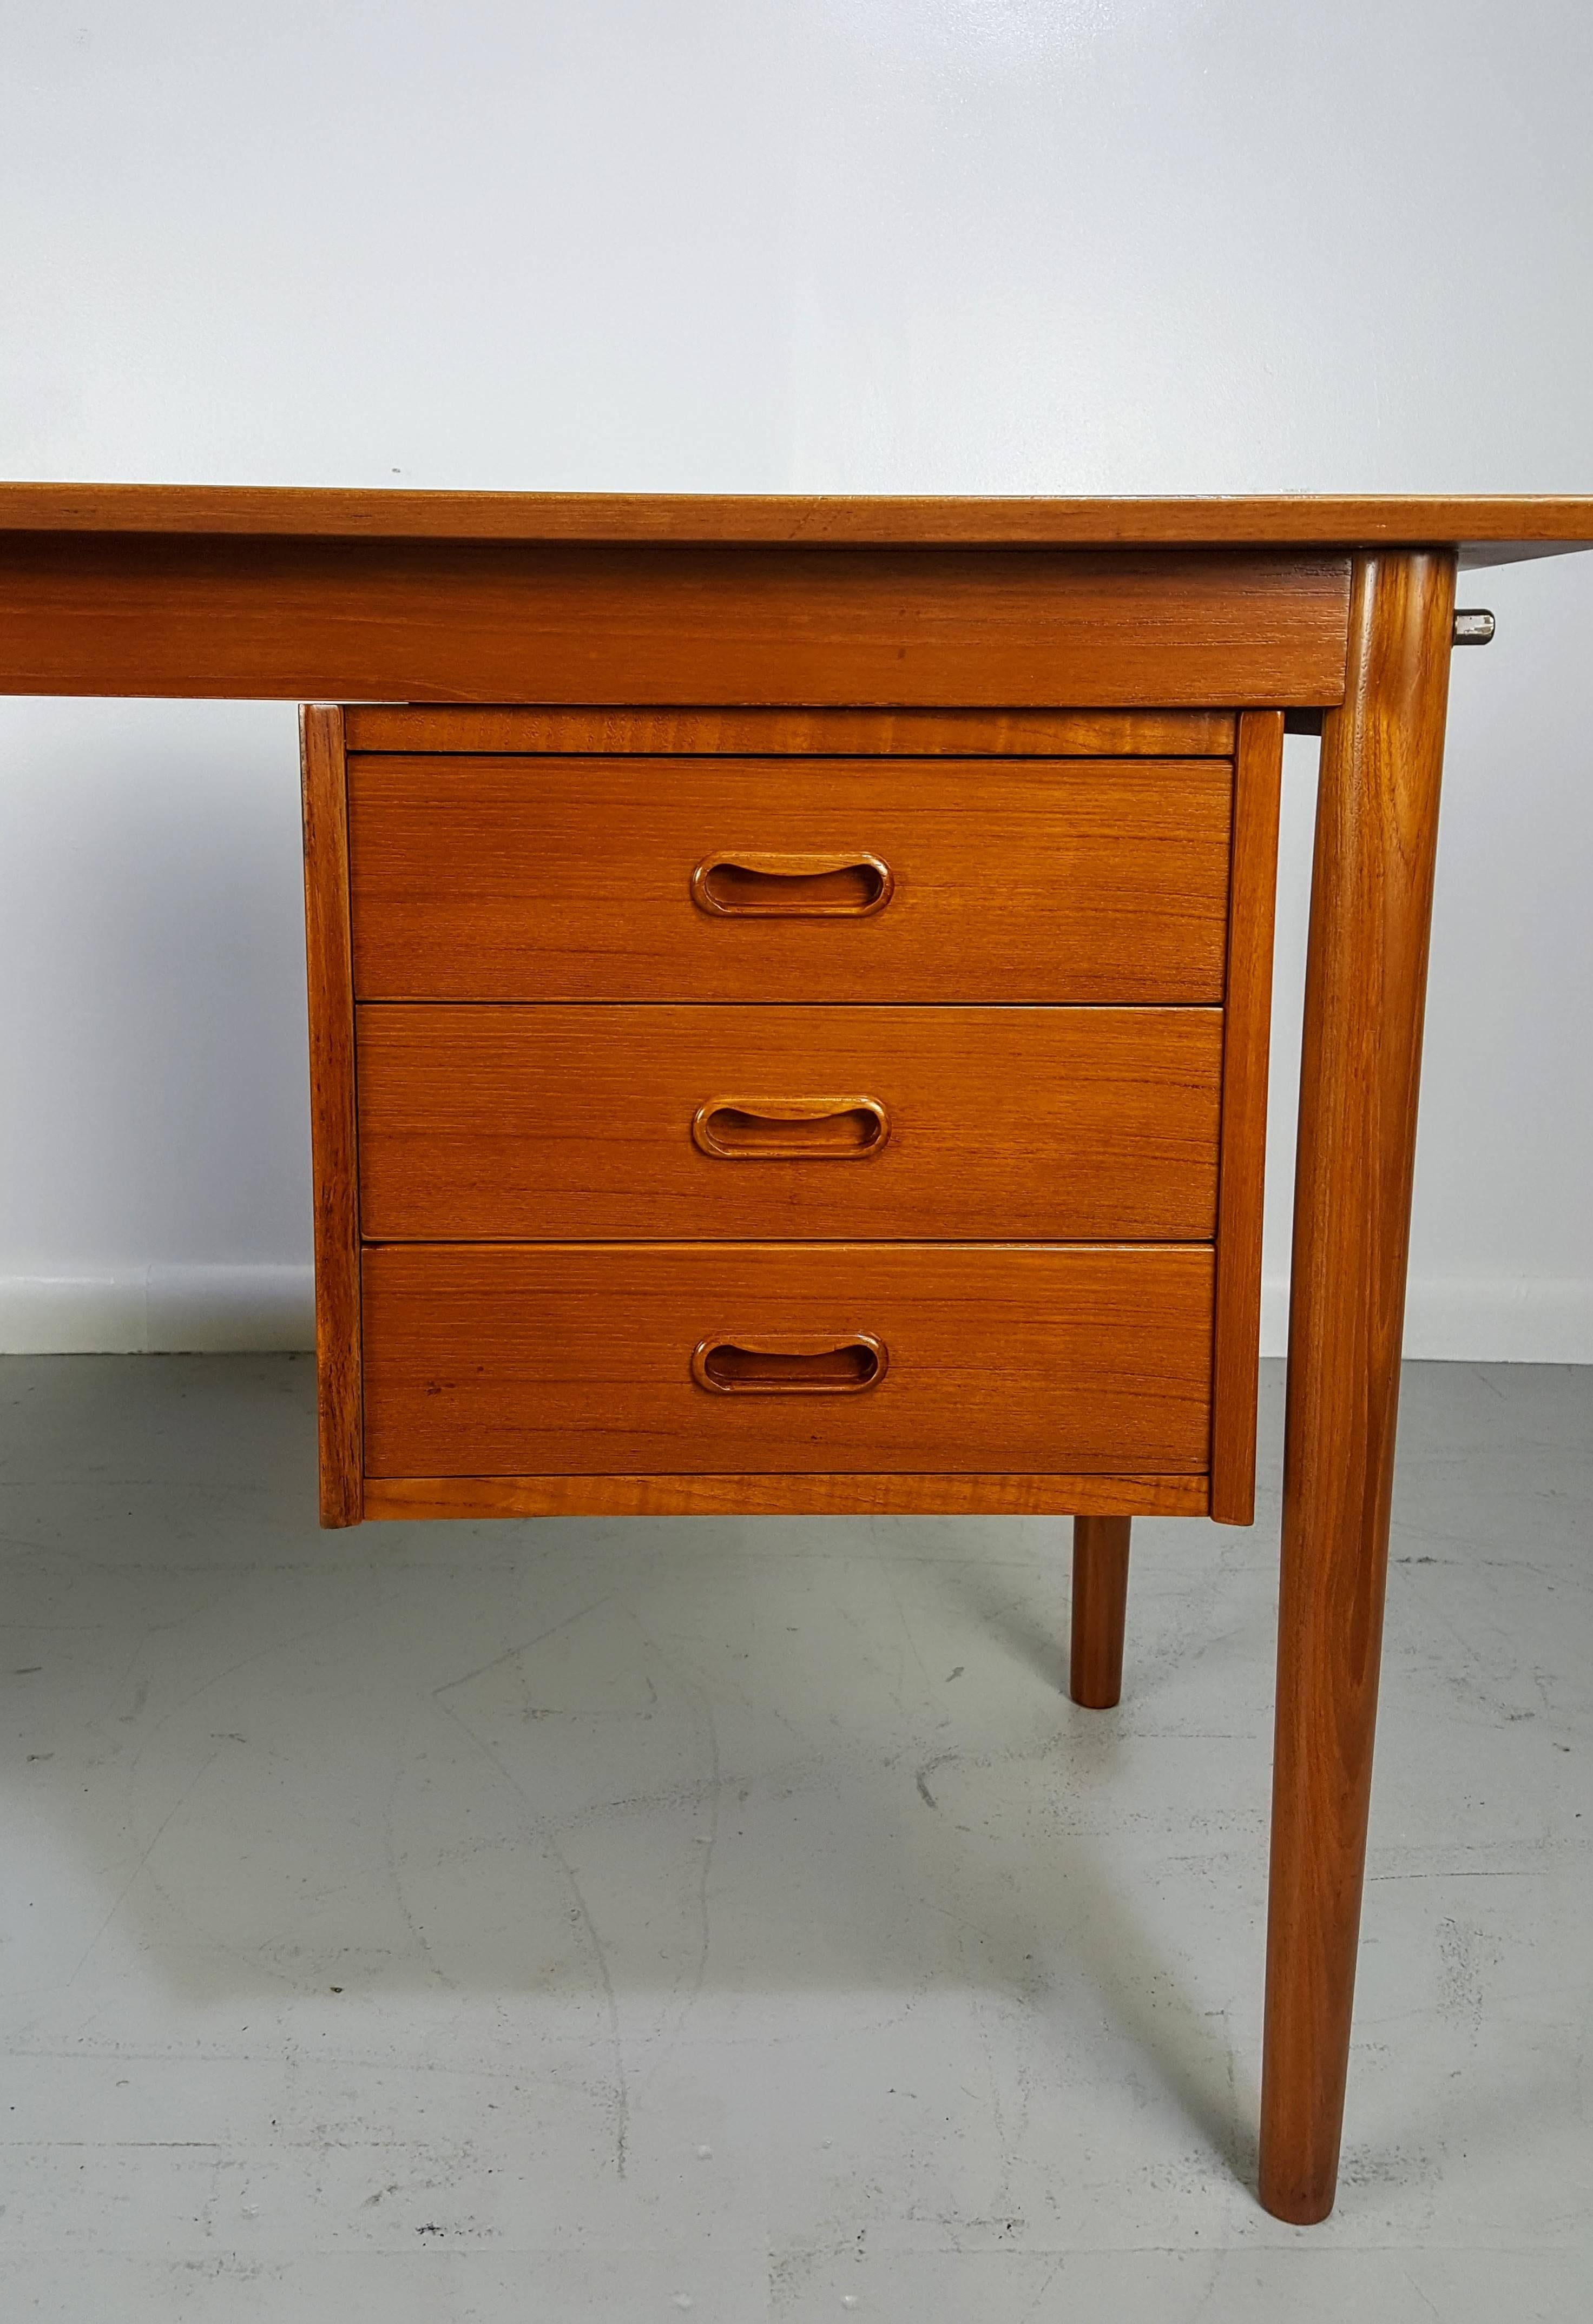 Arne Vodder writing desk, 1950s.

See this item in our private NYC showroom! Refine limited is located in the heart of chelsea at the history Starrett-Lehigh building, 601 West 26th Street, Suite M258. Please call us to schedule an appointment.